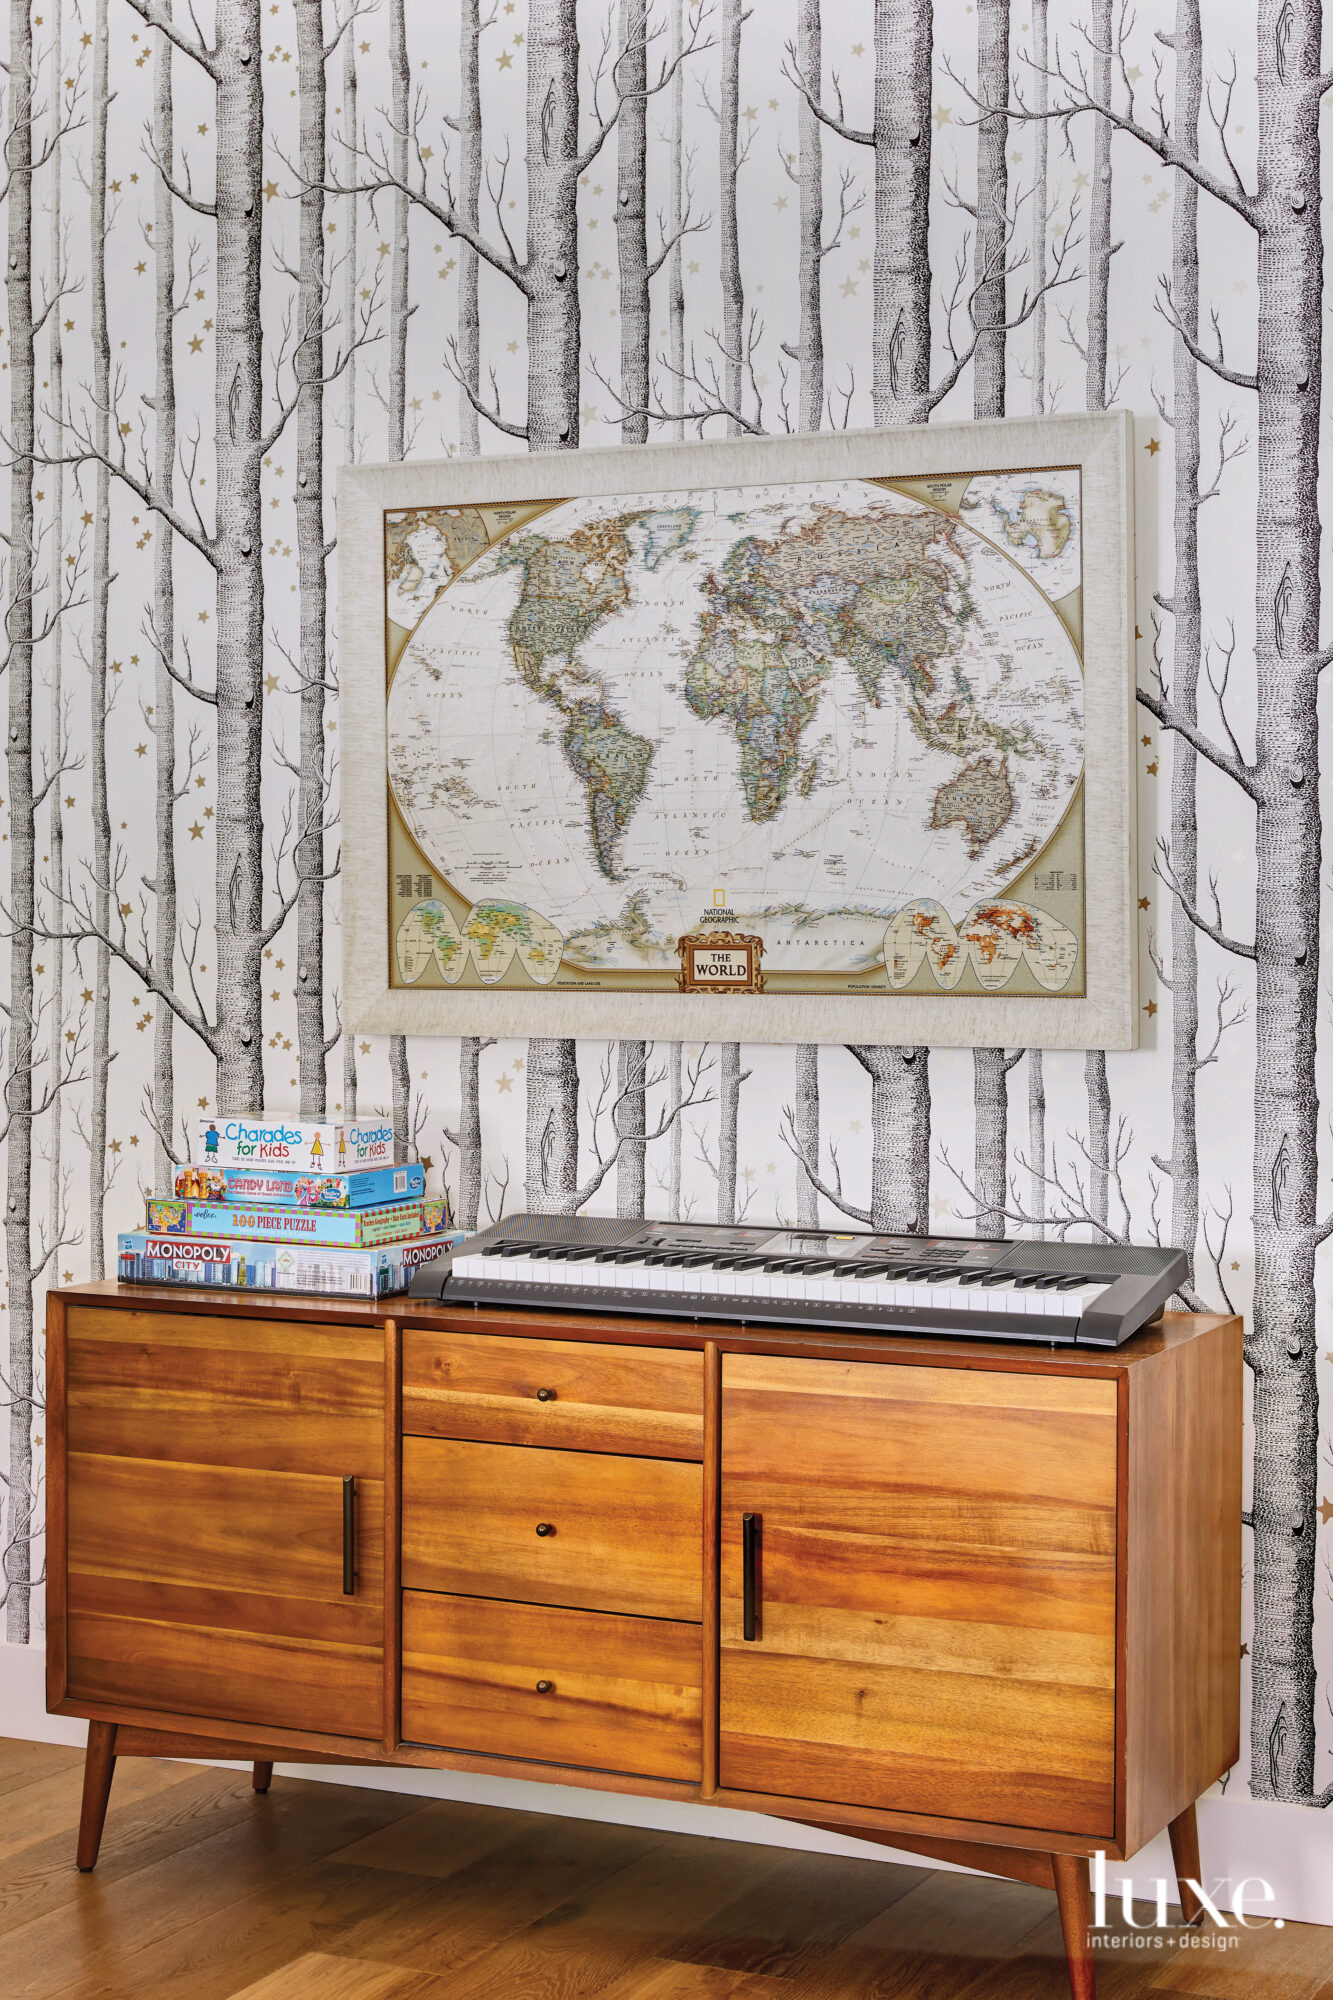 In the kids' play room hangs illustrated wooded wallpaper and a map of the world.